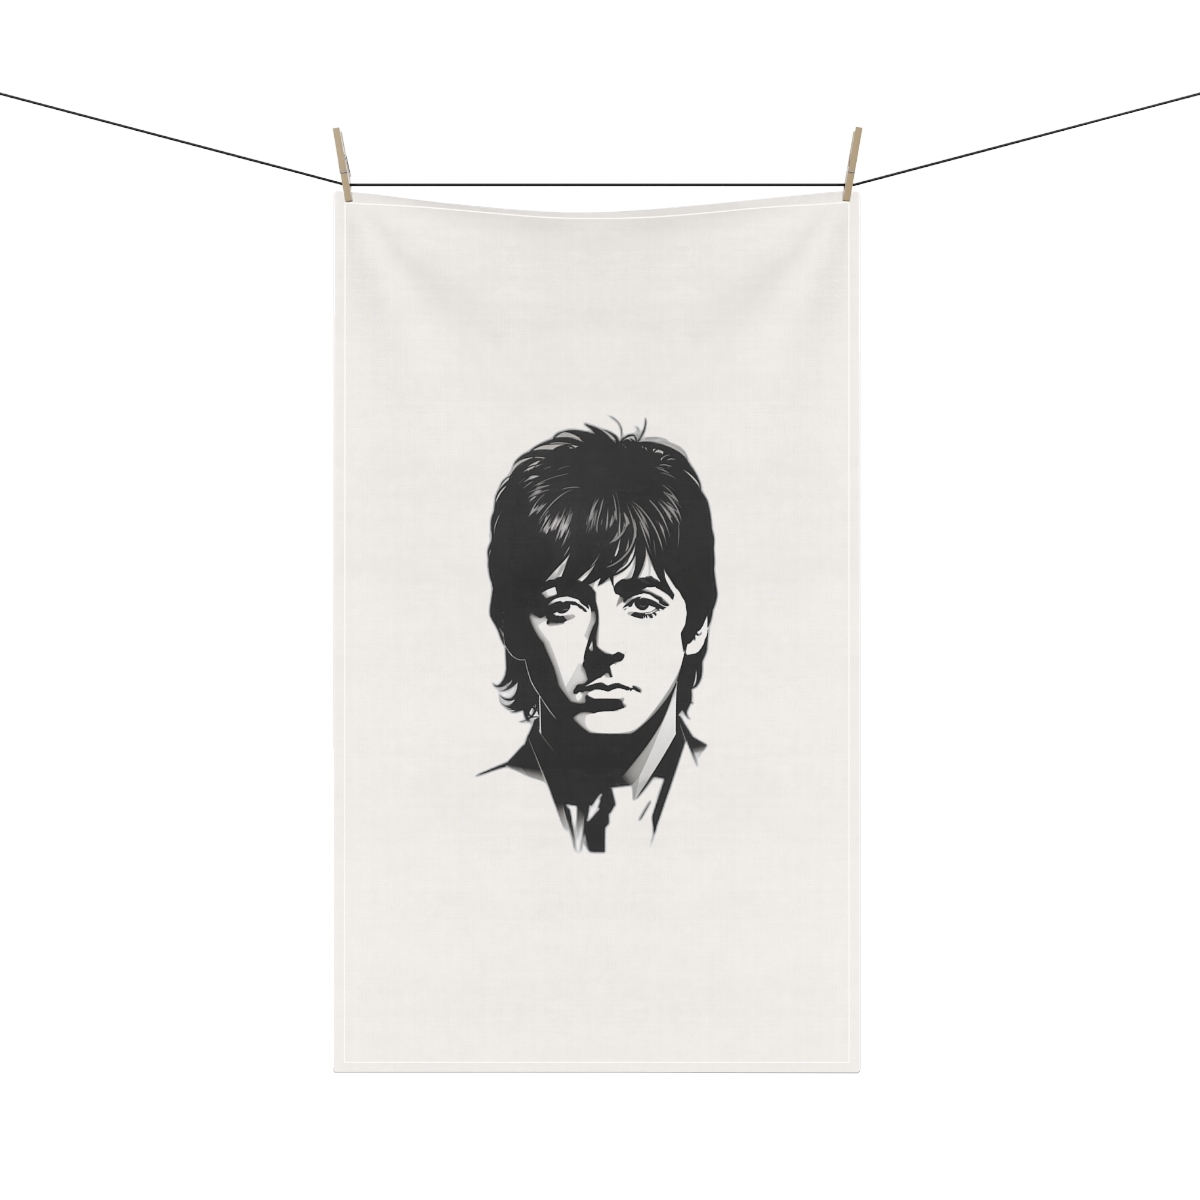 Boldly Adorn Your Kitchen with Musical Heritage: Paul McCartney Print Kitchen To - $22.66 - $24.72